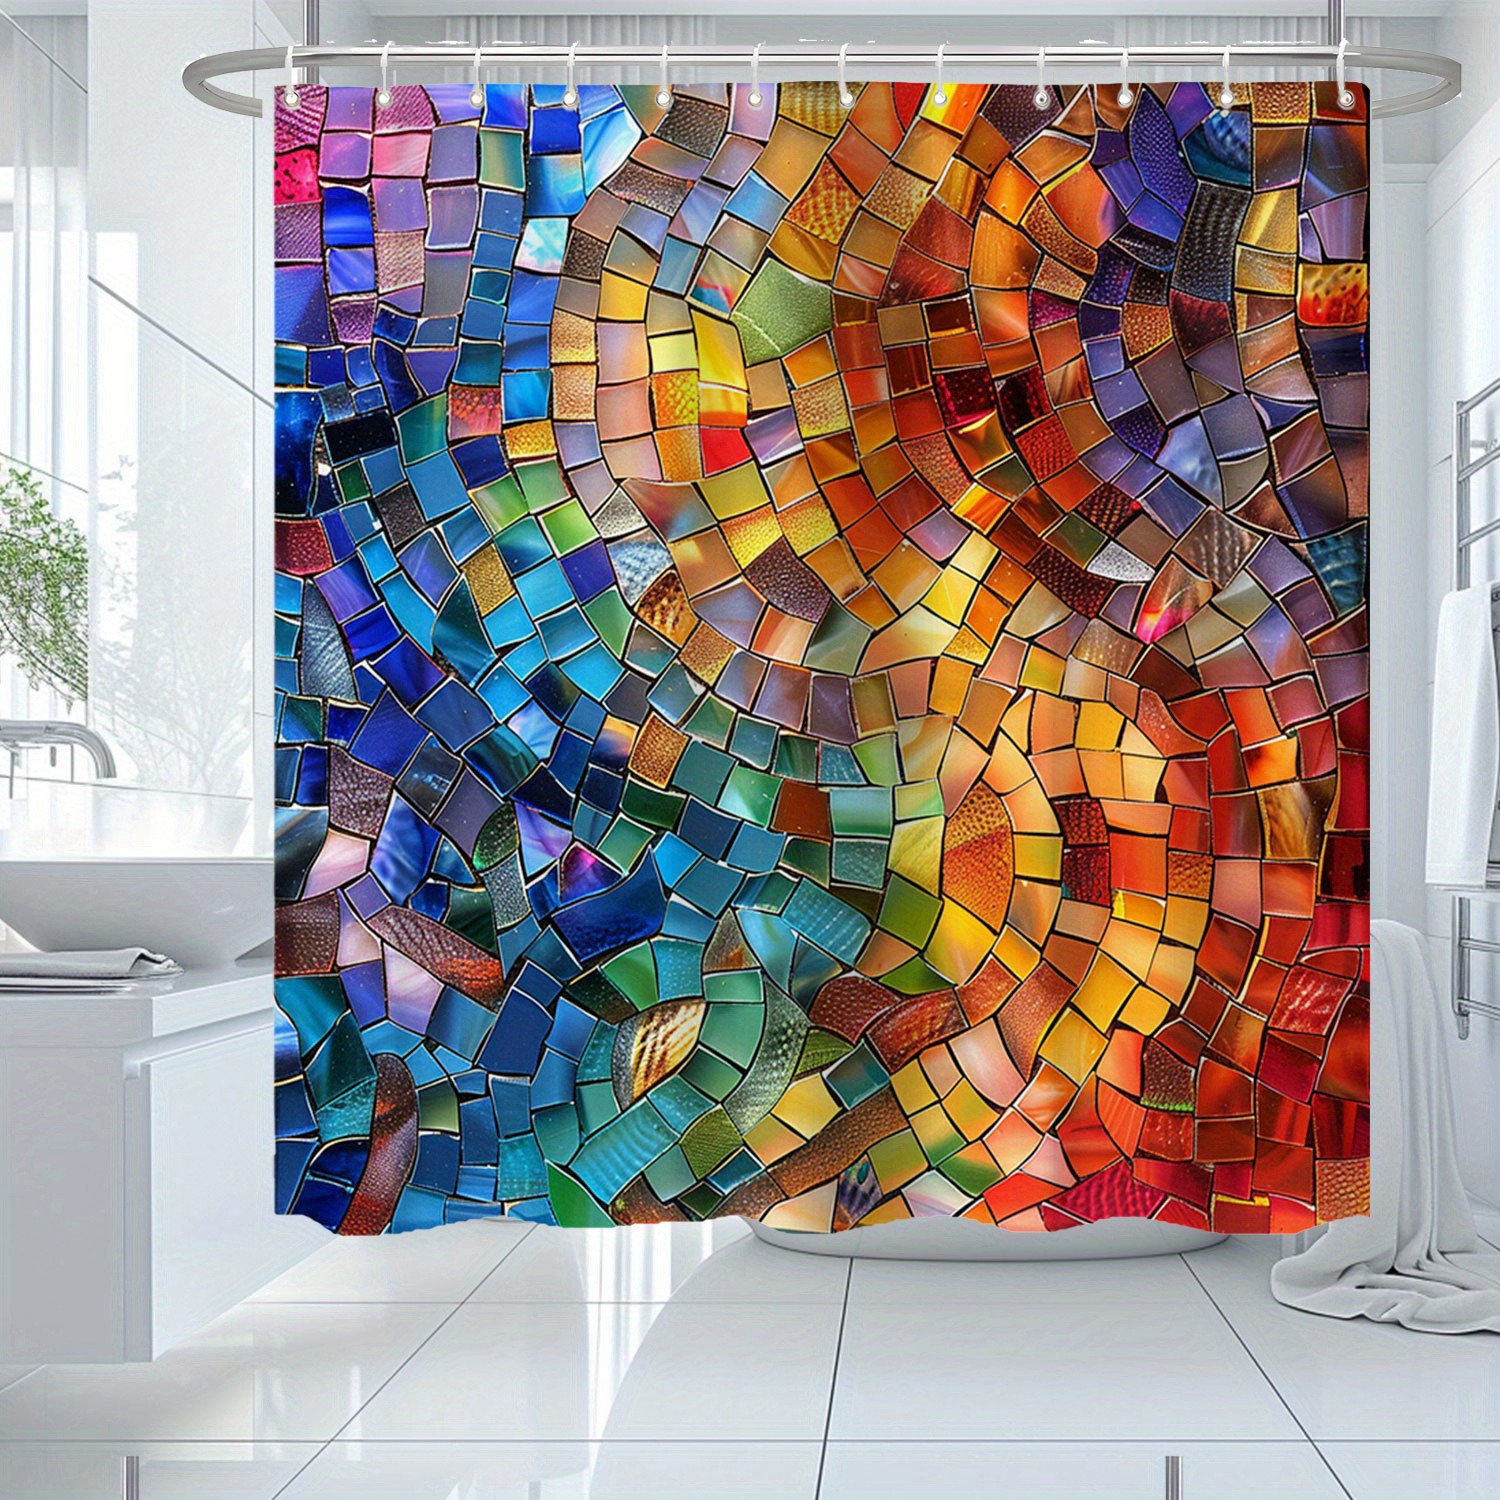 

Abstract Mosaic Art Design Water-resistant Polyester Shower Curtain With 12 Hooks, Non-animal Themed Printed Bathroom Decor, Artistic Woven Fabric Bath Accessory, Easy Care 71x71 Inches